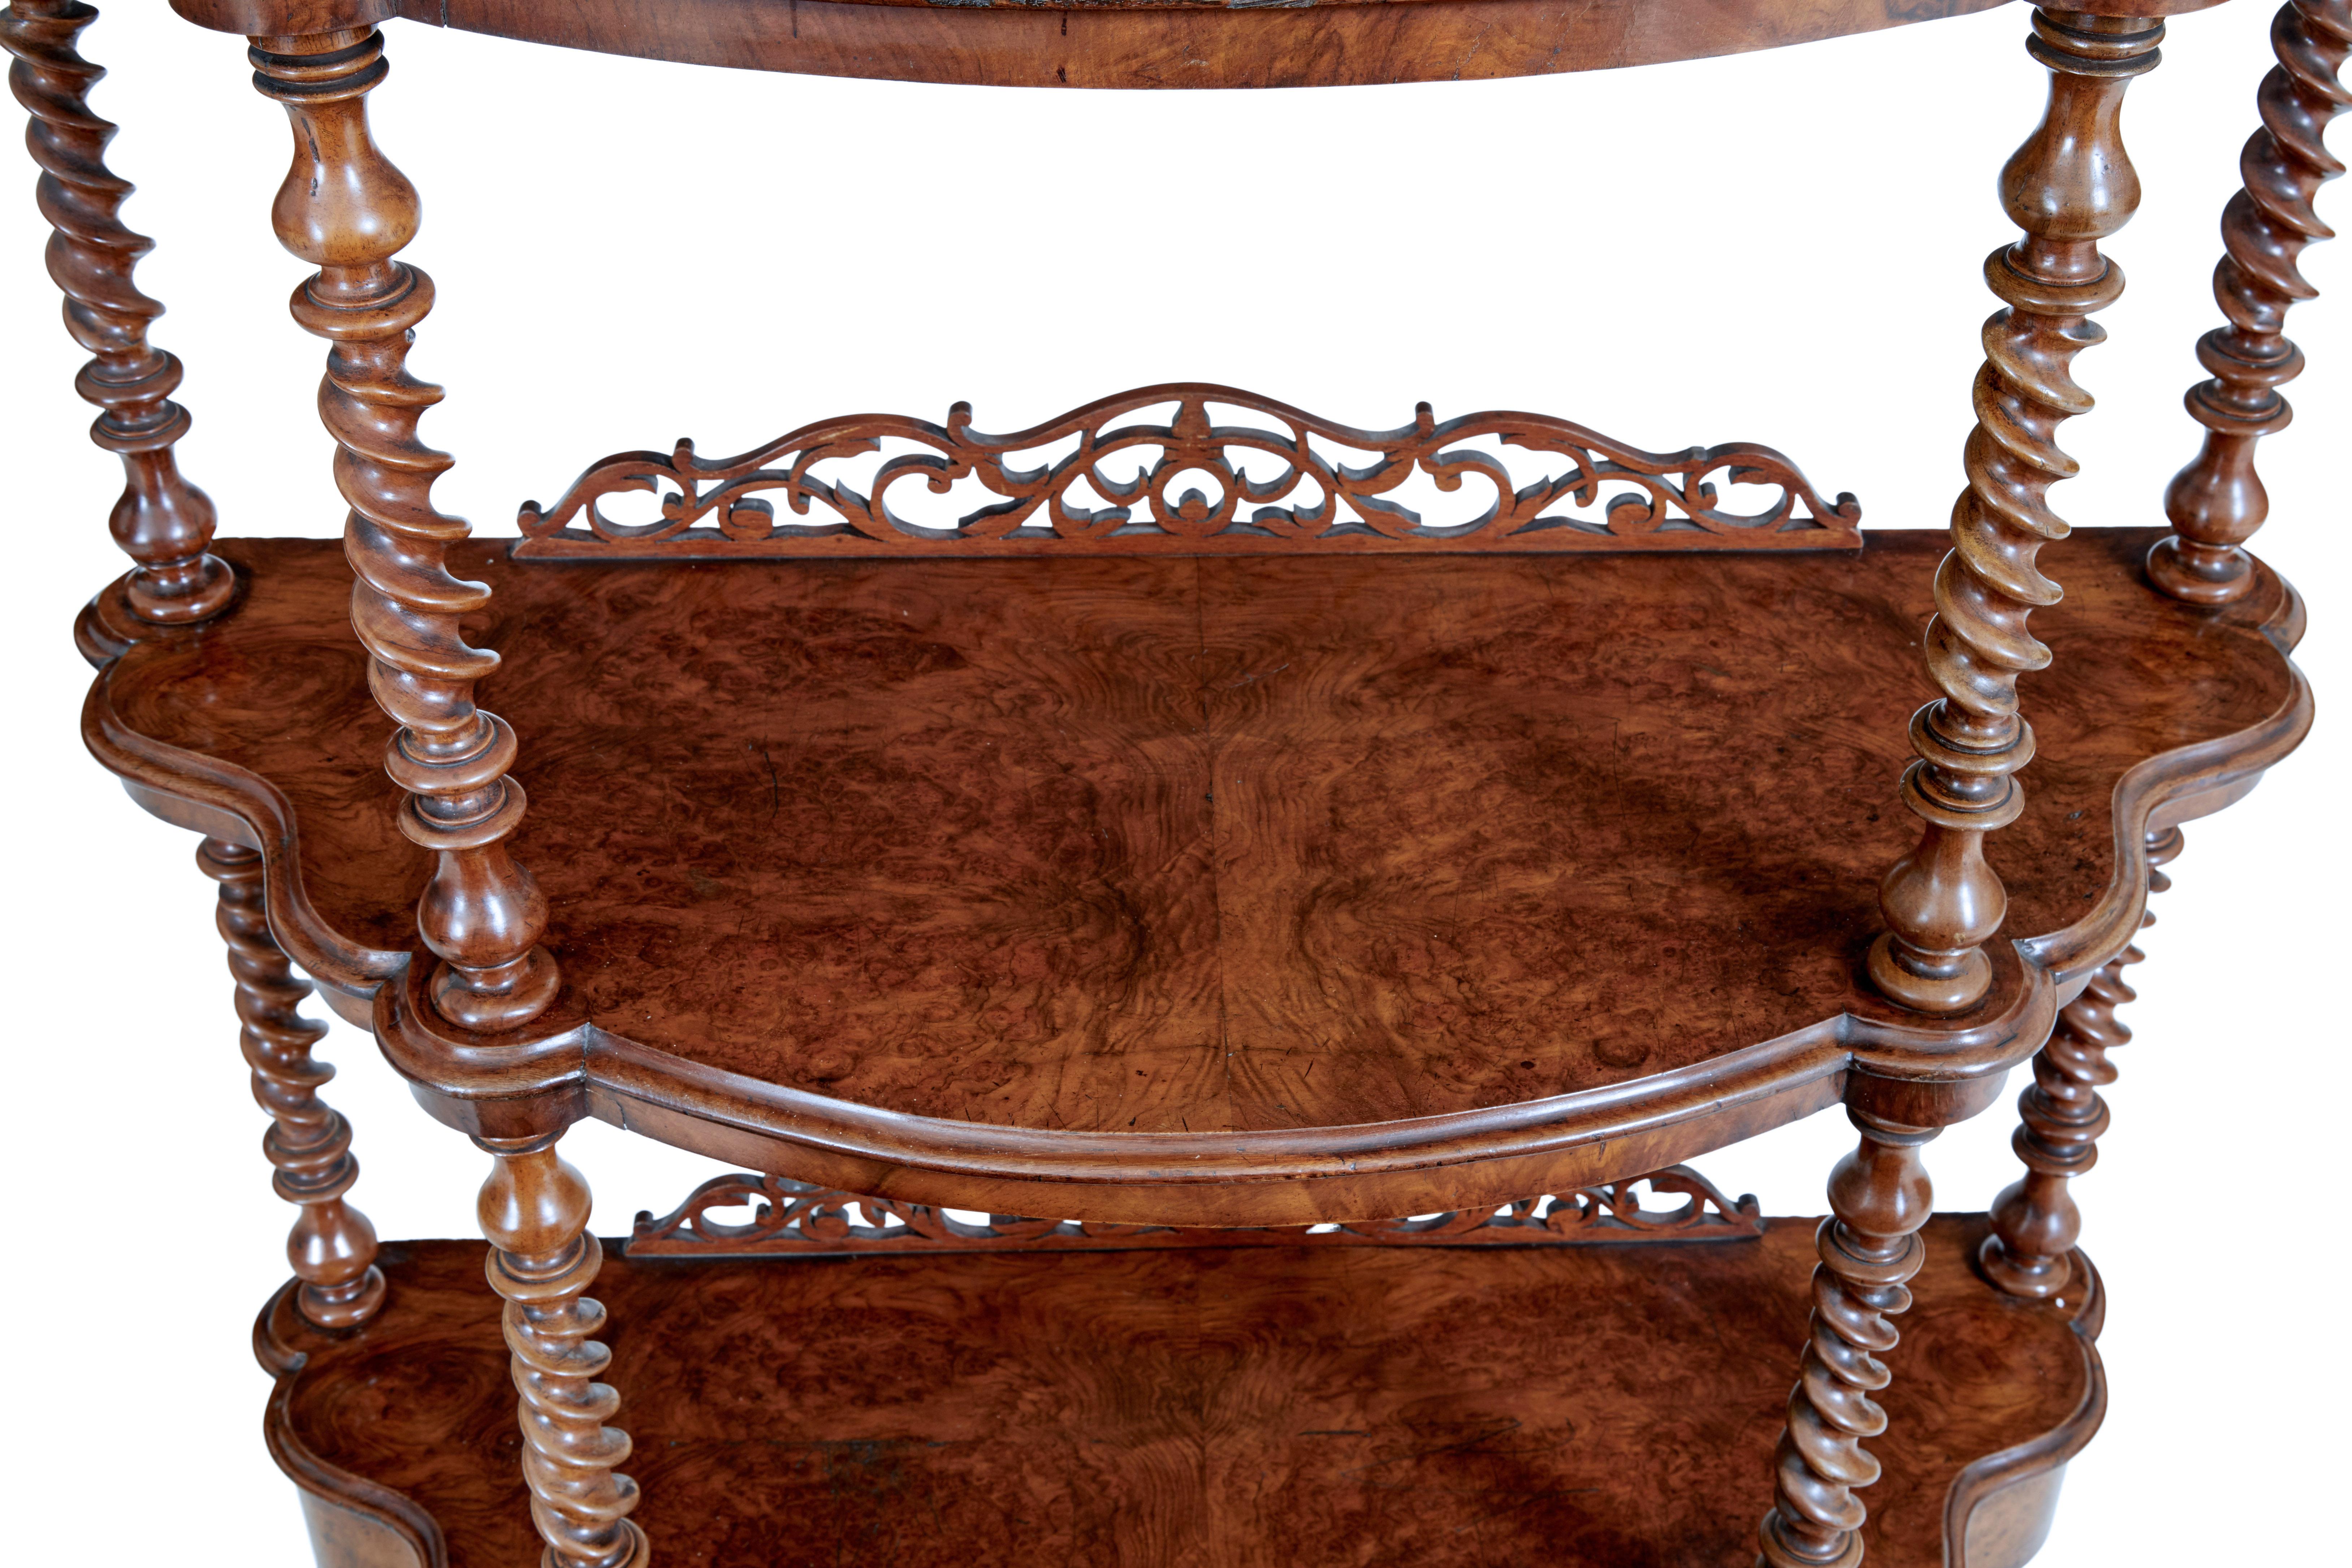 19th century walnut victorian what not stand, circa 1870.

Good quality walnut what not. Beautifully veneered in burr walnut. 3 tiers, top tier with mirror and applied ornate carving. United by turned twists. Drawer in the base, standing on